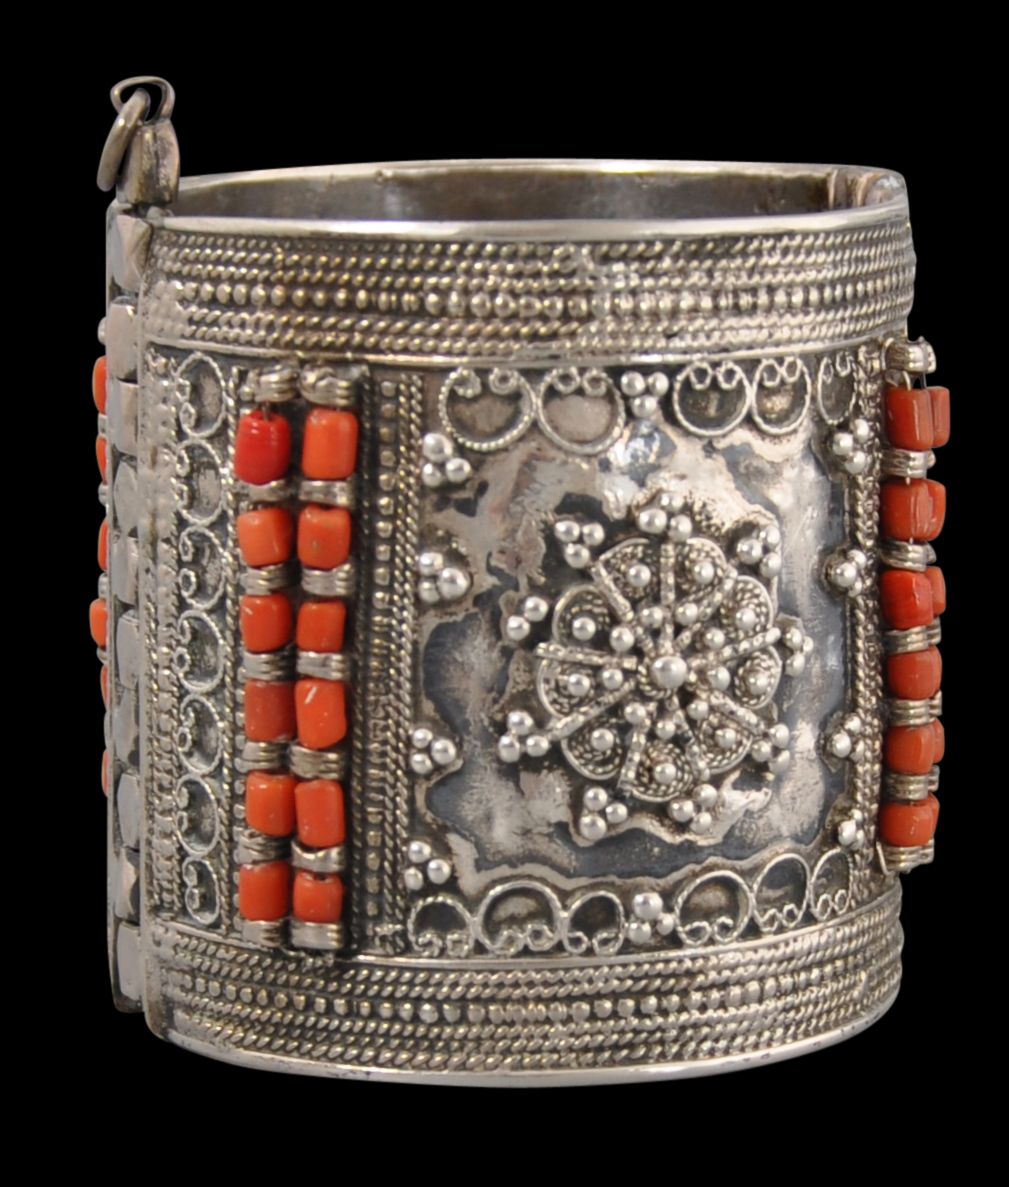 Nepali Turquoise Coral Cuff Bracelet with Filigree Work – Cosmic Norbu